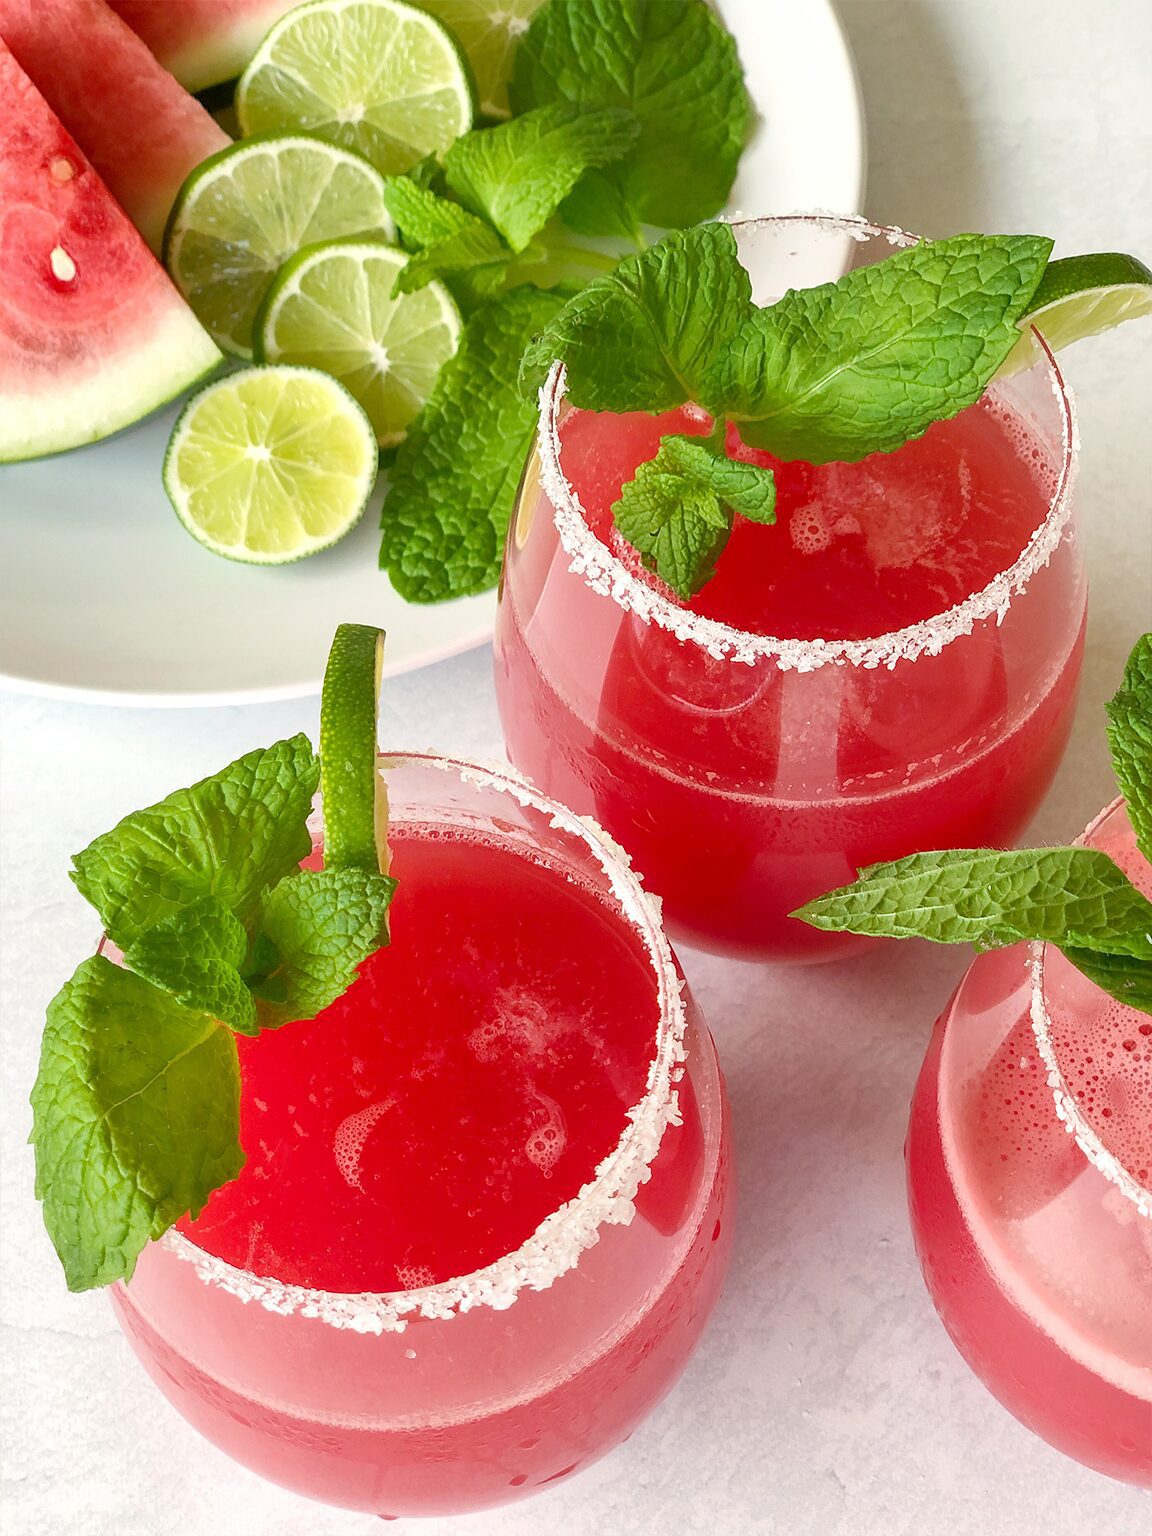 This Watermelon Agua Fresca is made with fresh watermelon, lime juice, and agave nectar. It's cool, light, and refreshing!